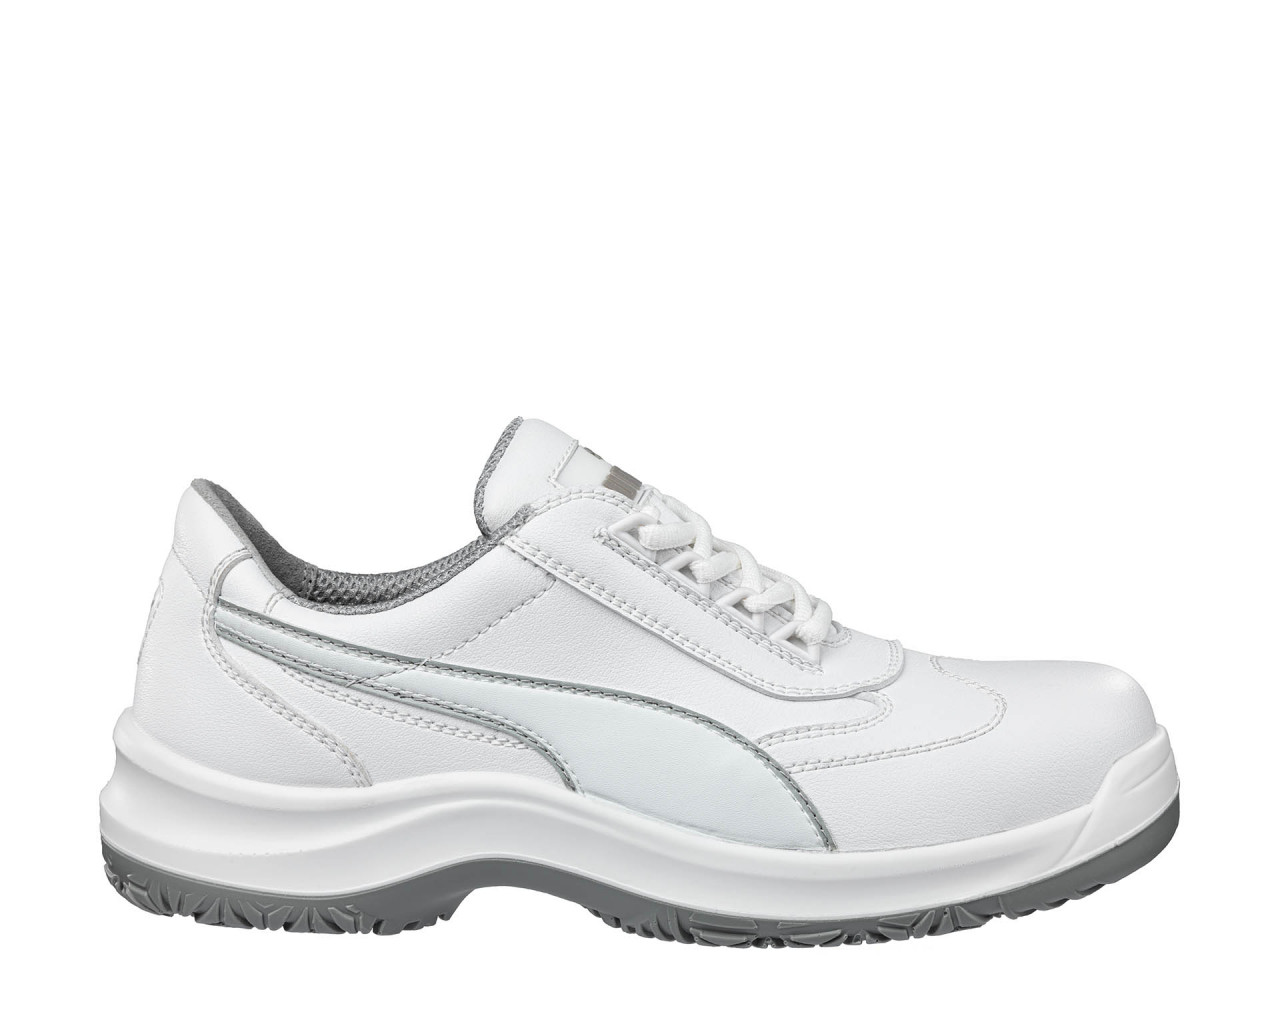 PUMA SAFETY CLARITY LOW S2 SRC